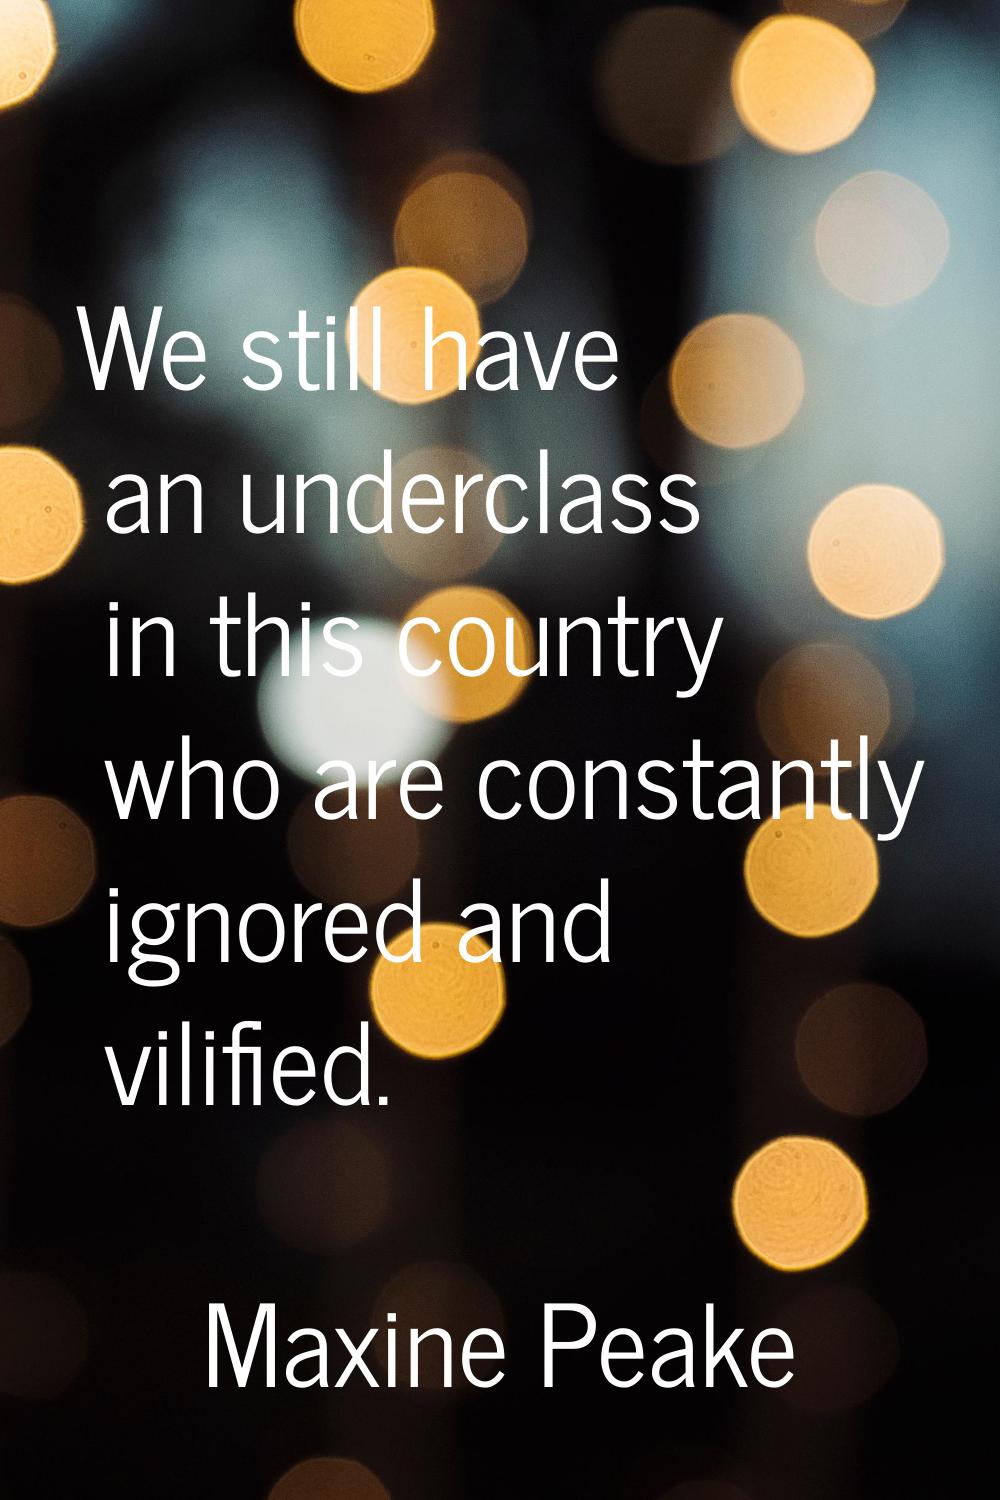 We still have an underclass in this country who are constantly ignored and vilified.